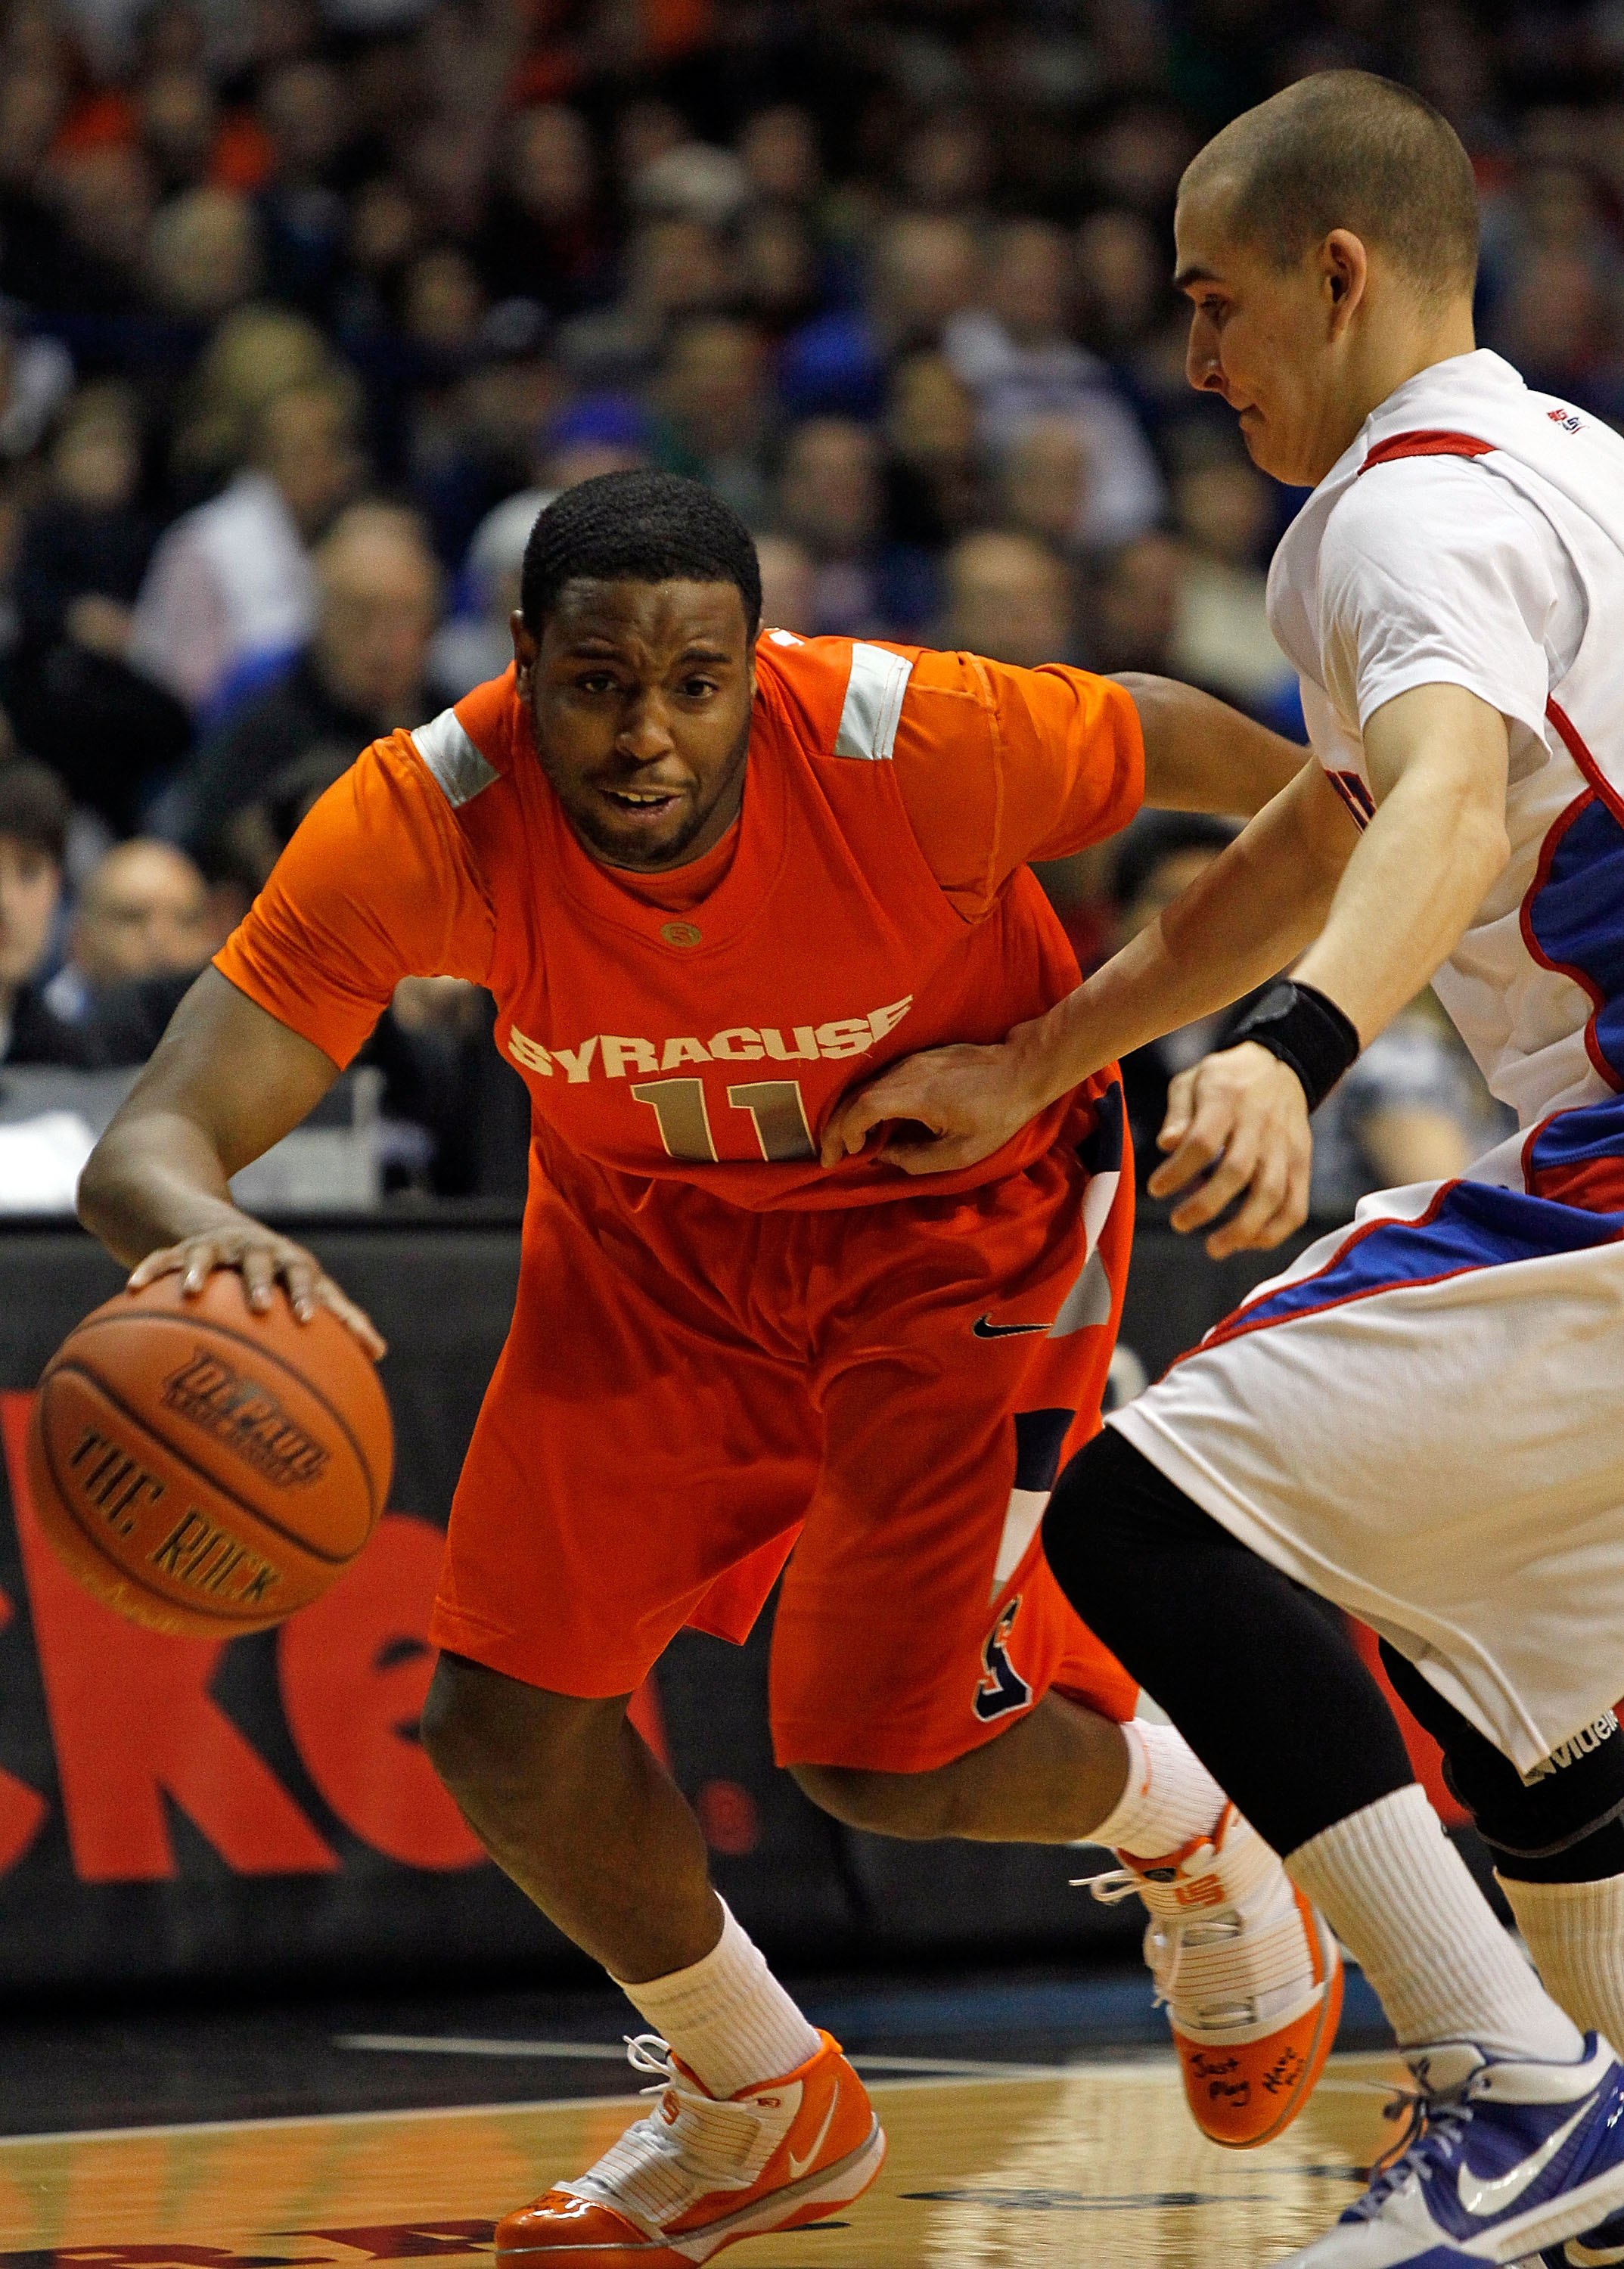 ROSEMONT, IL - JANUARY 30: Scoop Jardine #11 of the Syracuse Orange moves against Michael Bizoukas #0 of the DePaul Blue Demons at the Allstate Arena on January 30, 2010 in Rosemont, Illinois. Syracuse defeated DePaul 59-57. (Photo by Jonathan Daniel/Gett